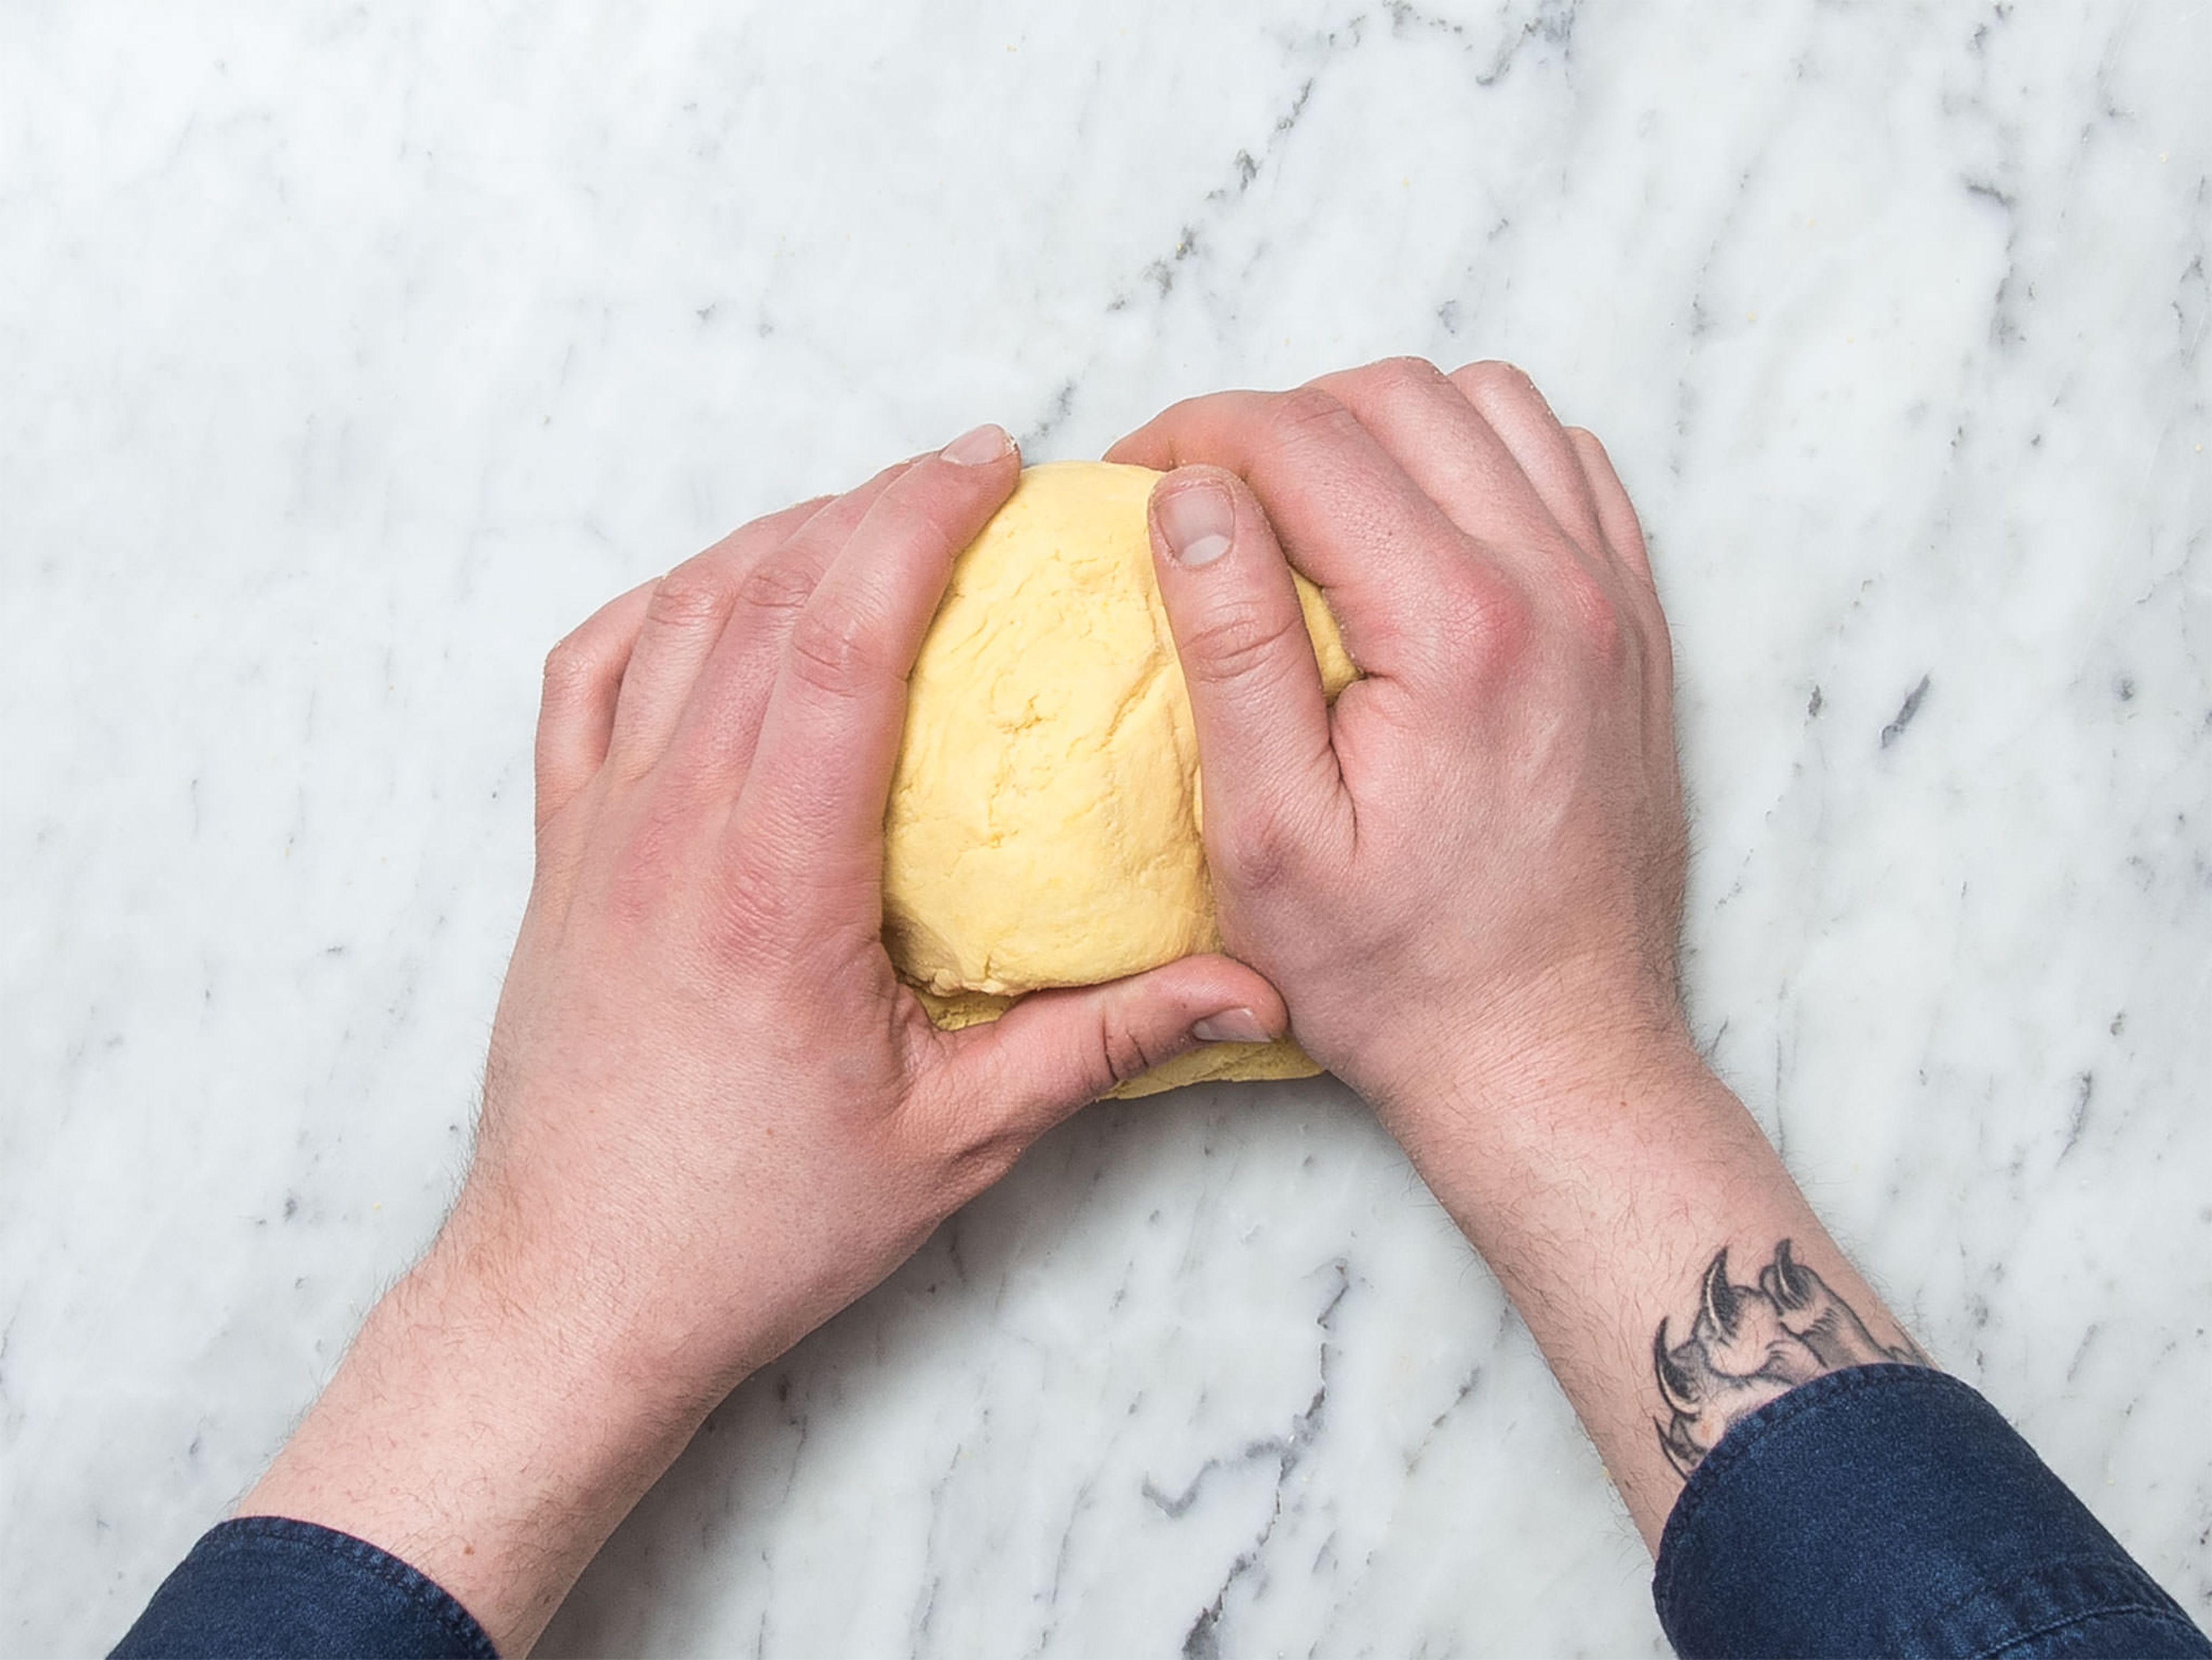 Add cornflour, most of the flour, two-thirds of the salt, olive oil, and water to a large bowl. Beat with a hand mixer with dough hook until a smooth dough forms. Knead the dough with your hands for approx. 5 min. more. Add more water if the dough crumbles too easily.